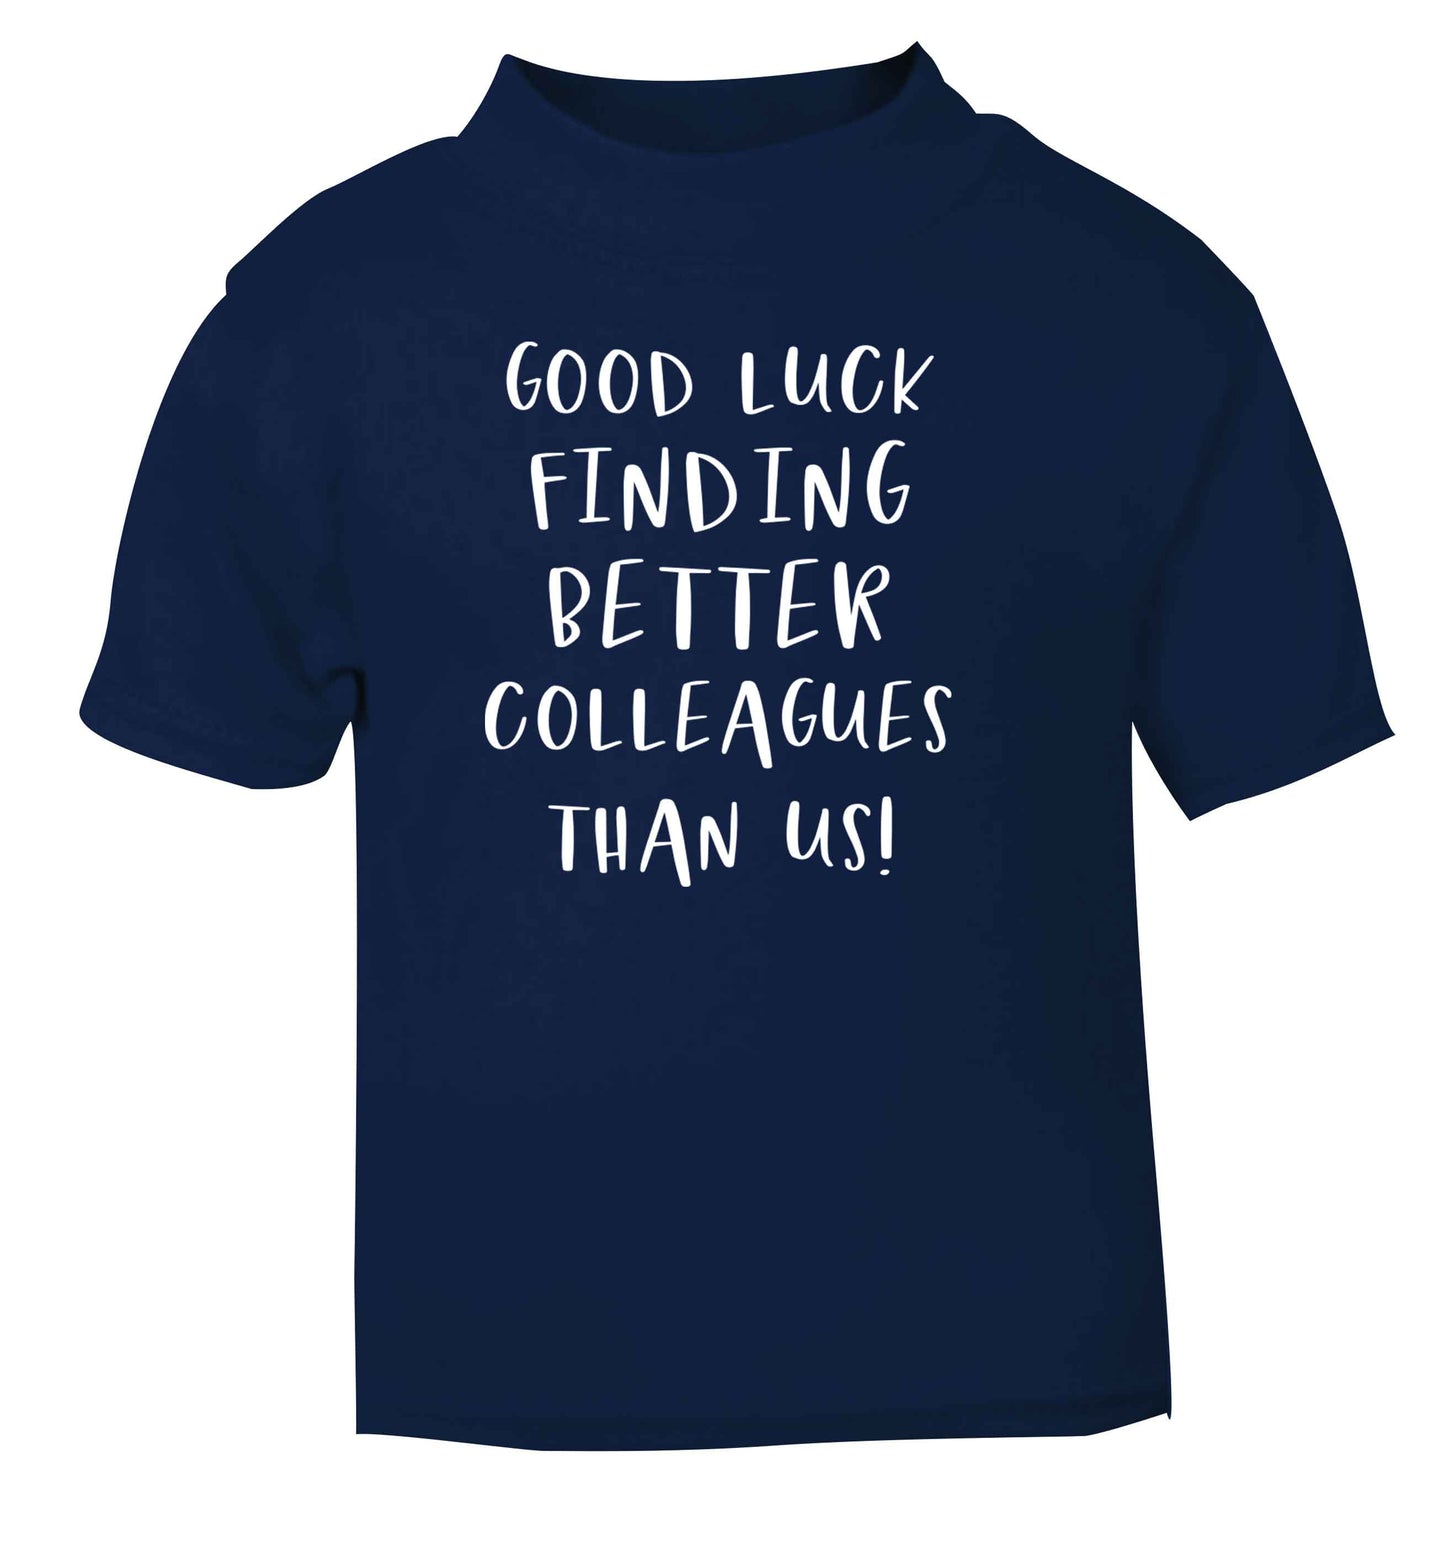 Good luck finding better colleagues than us! navy Baby Toddler Tshirt 2 Years